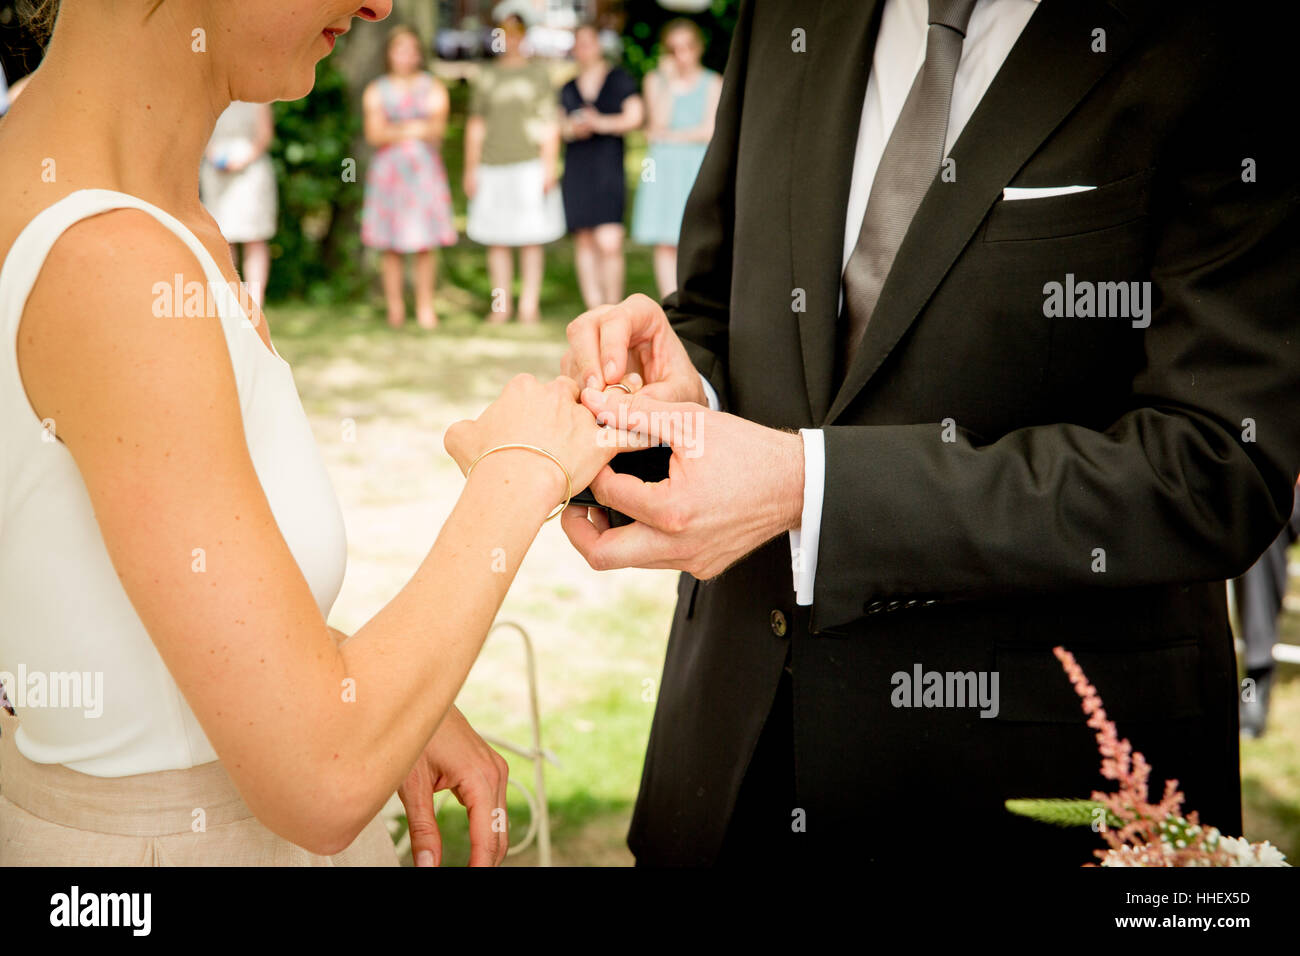 A just married couple exchanging wedding rings Stock Photo